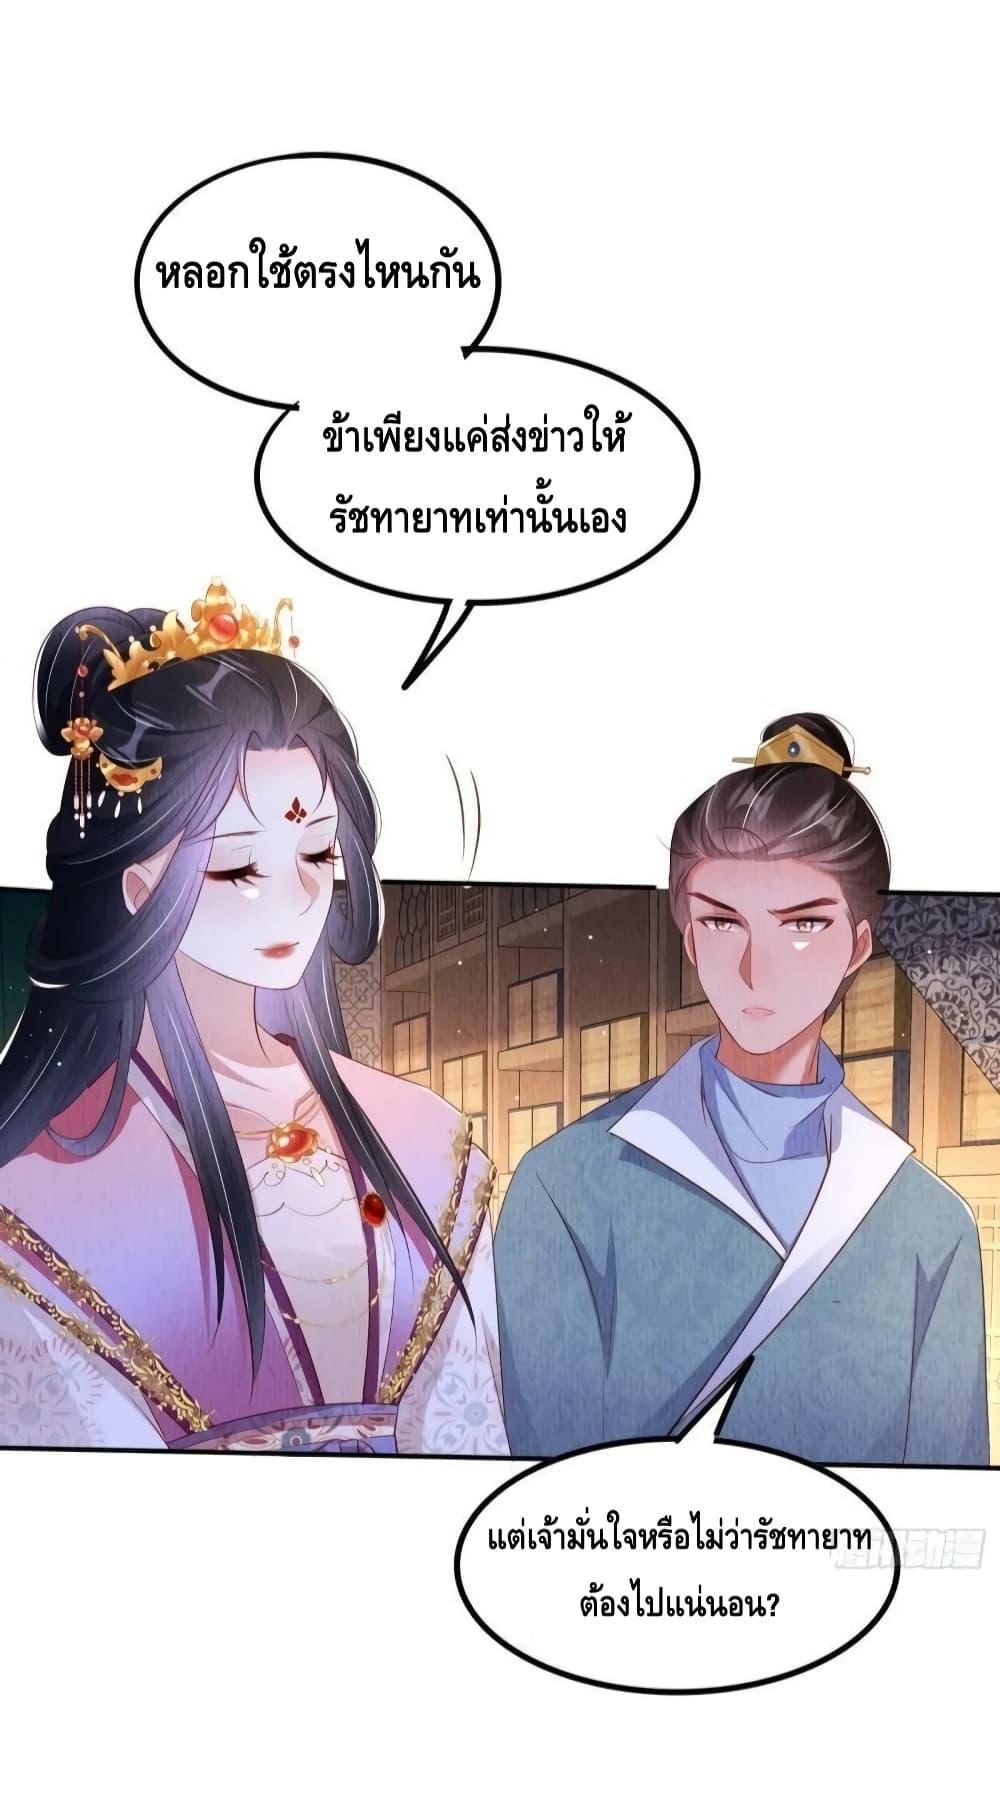 After I Bloom, a Hundred Flowers Will ill – ดอกไม้นับ ตอนที่ 53 (11)